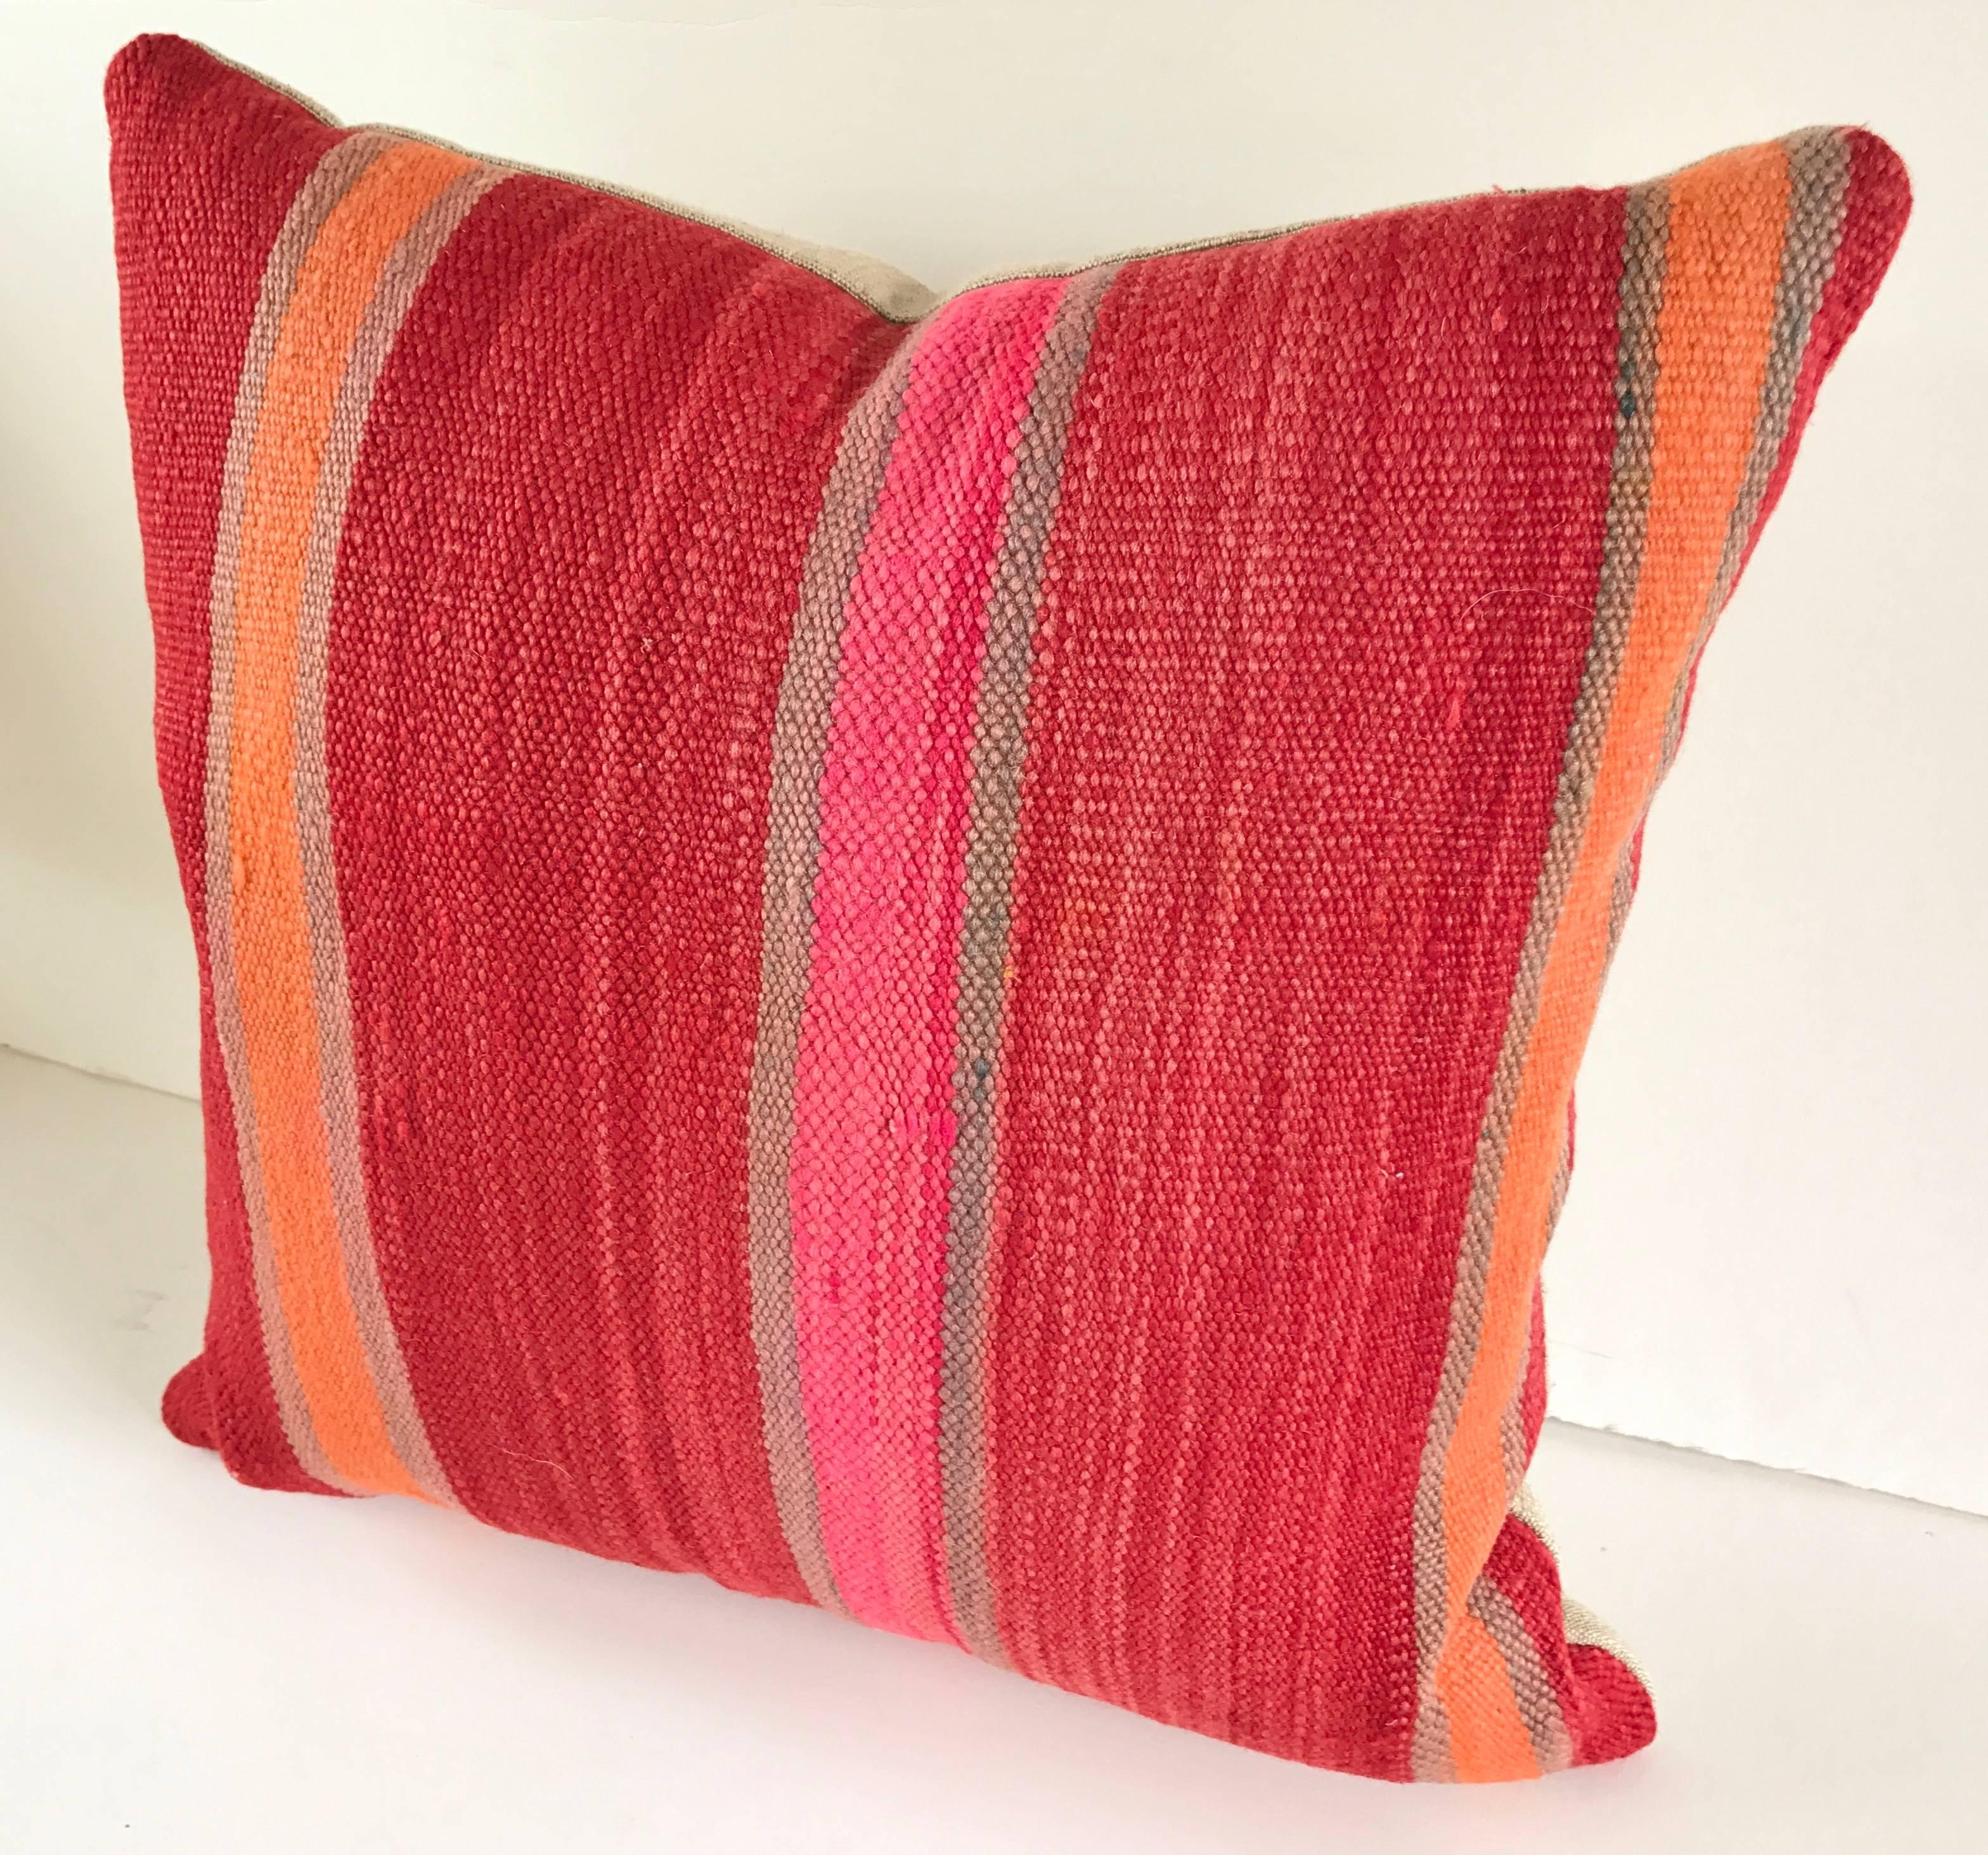 Custom pillow cut from a vintage Moroccan hand loomed wool Berber rug from the Atlas Mountains. Solo is soft and lustrous with good color. Pillow is backed in linen, filled with an insert of 50/50 down and feathers and hand-sewn closed. All custom